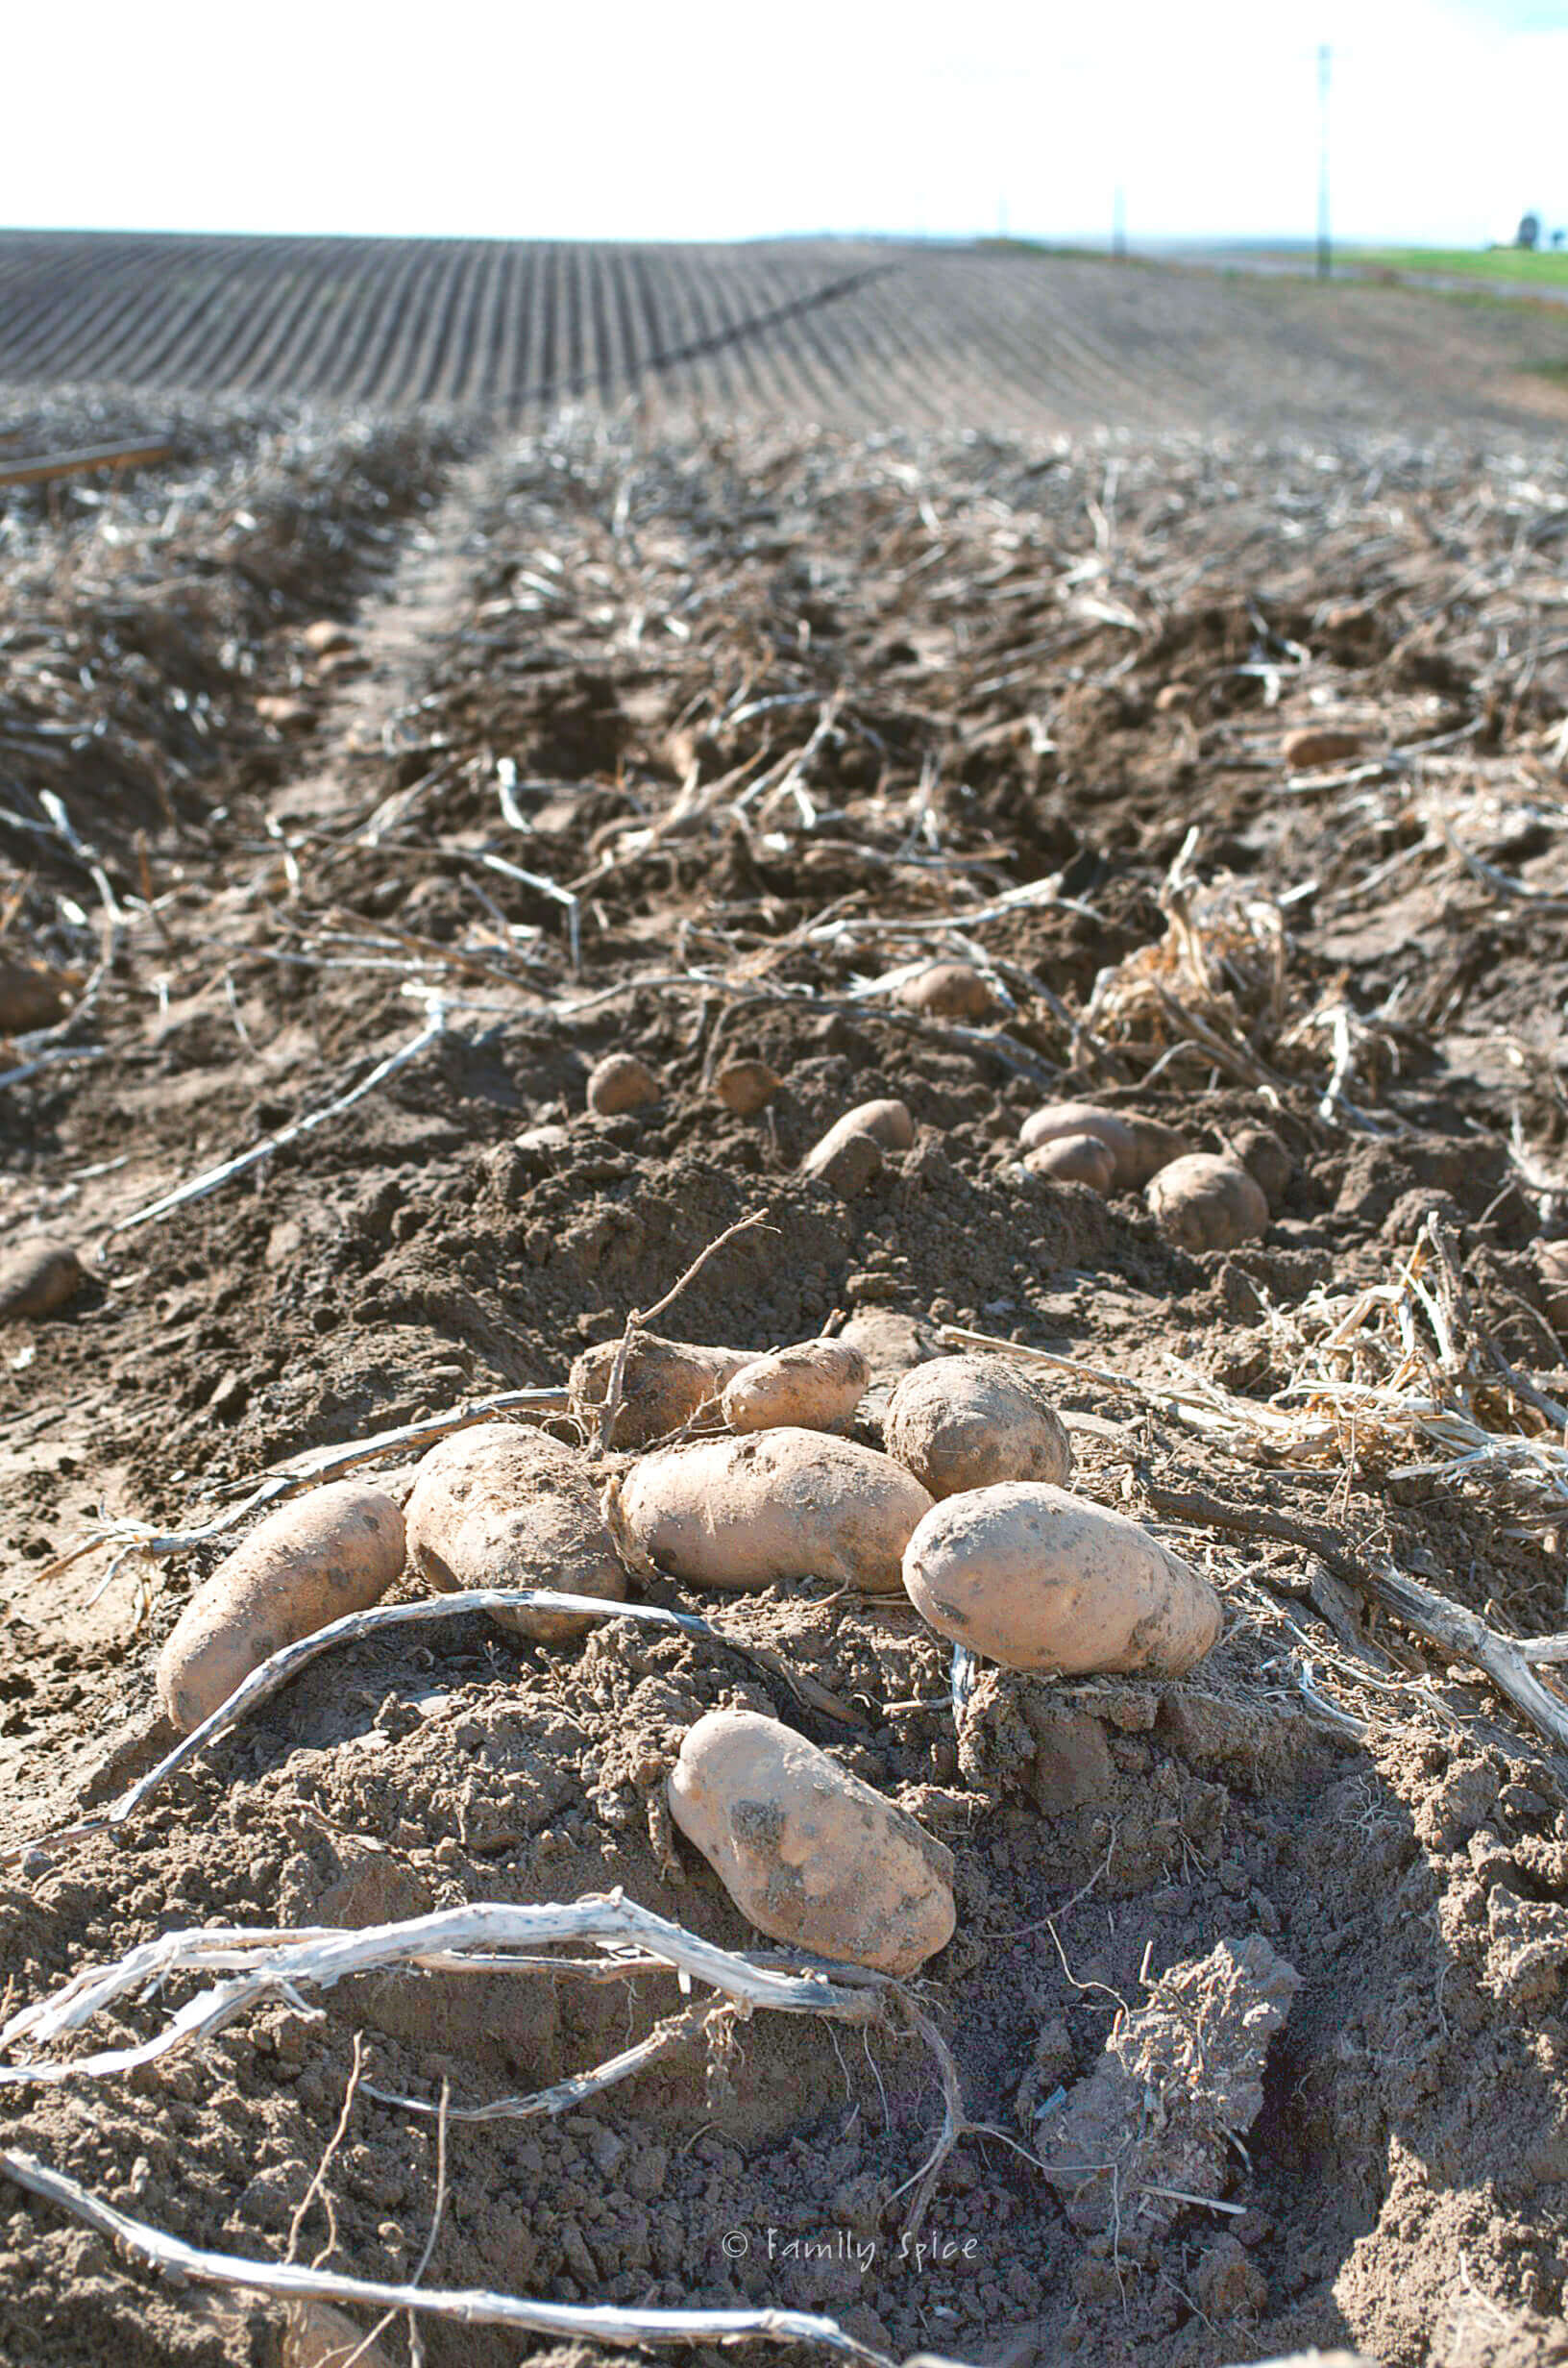 Potatoes just harvested in the field